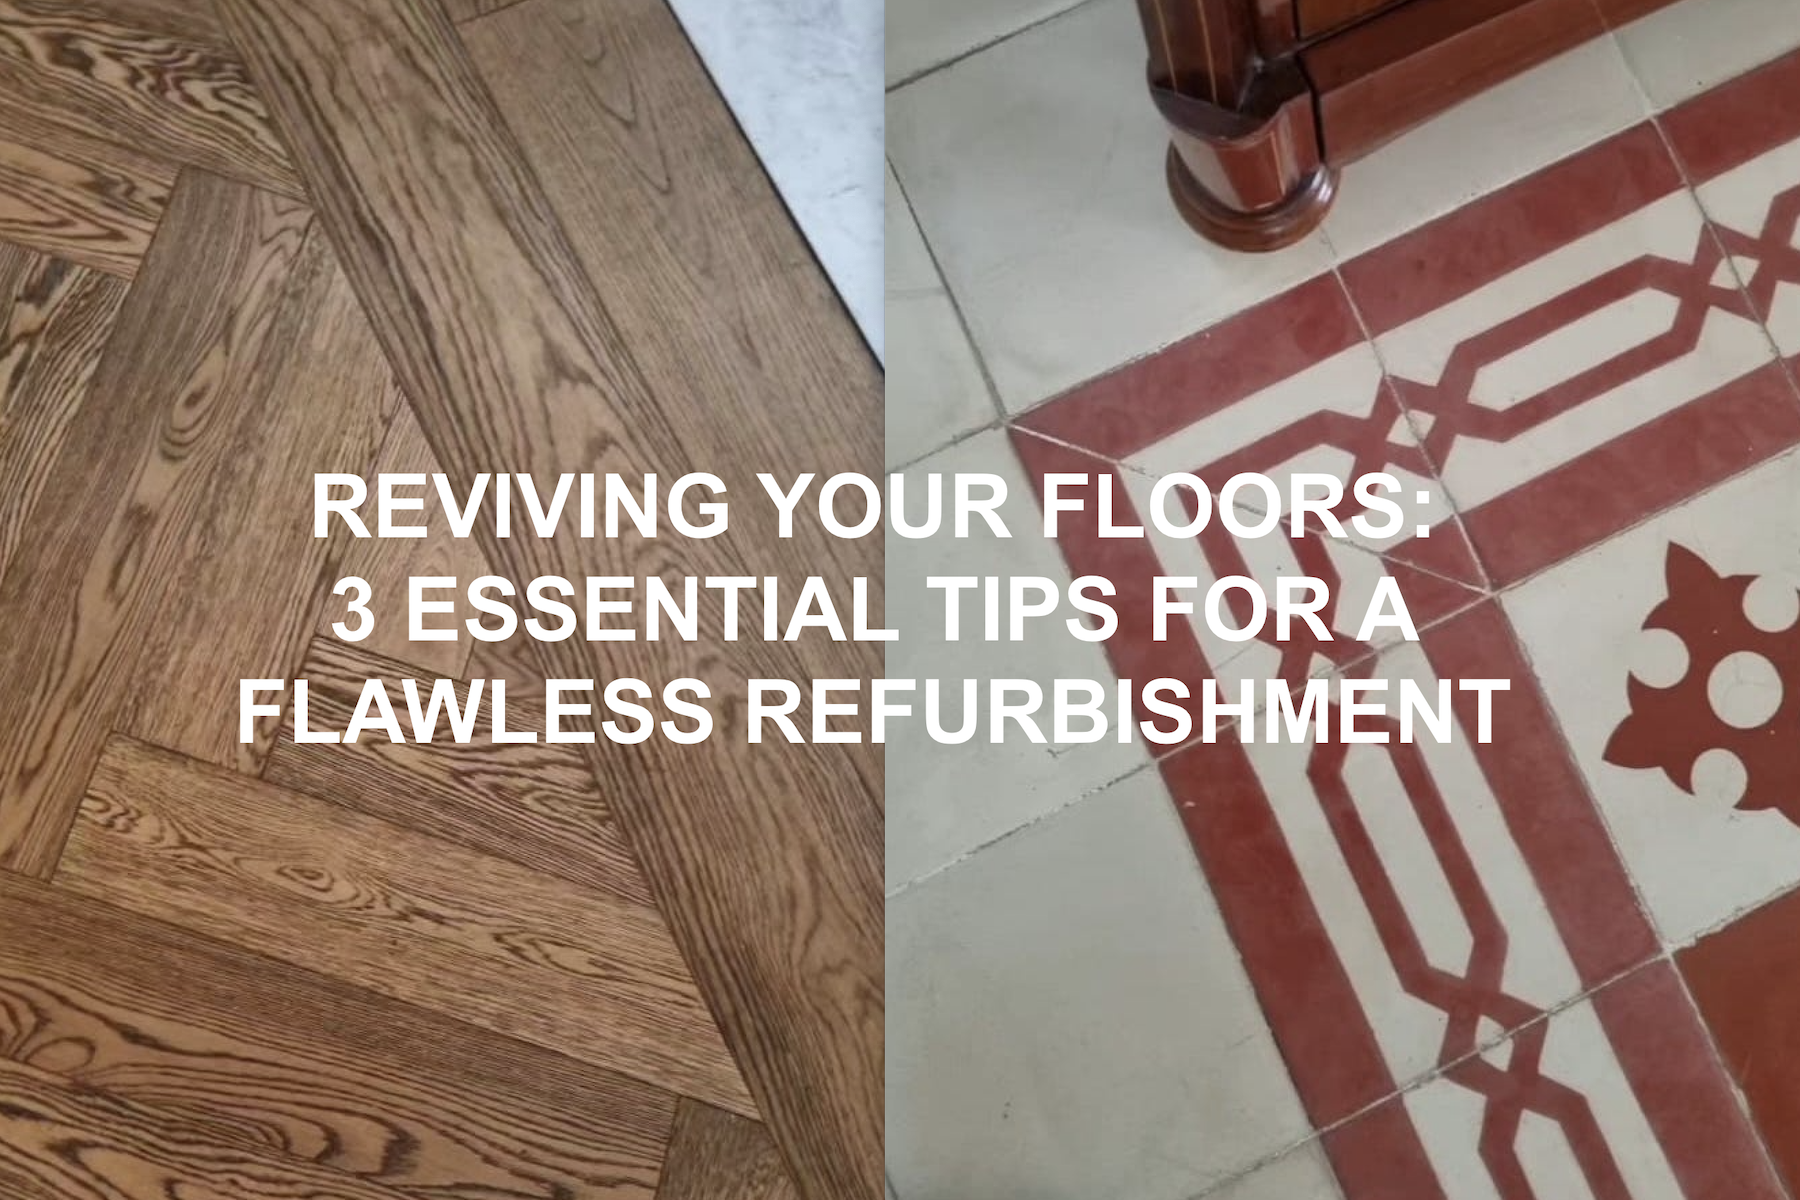 Image for Reviving Your Floors: 3 Essential Tips for a Flawless Refurbishment